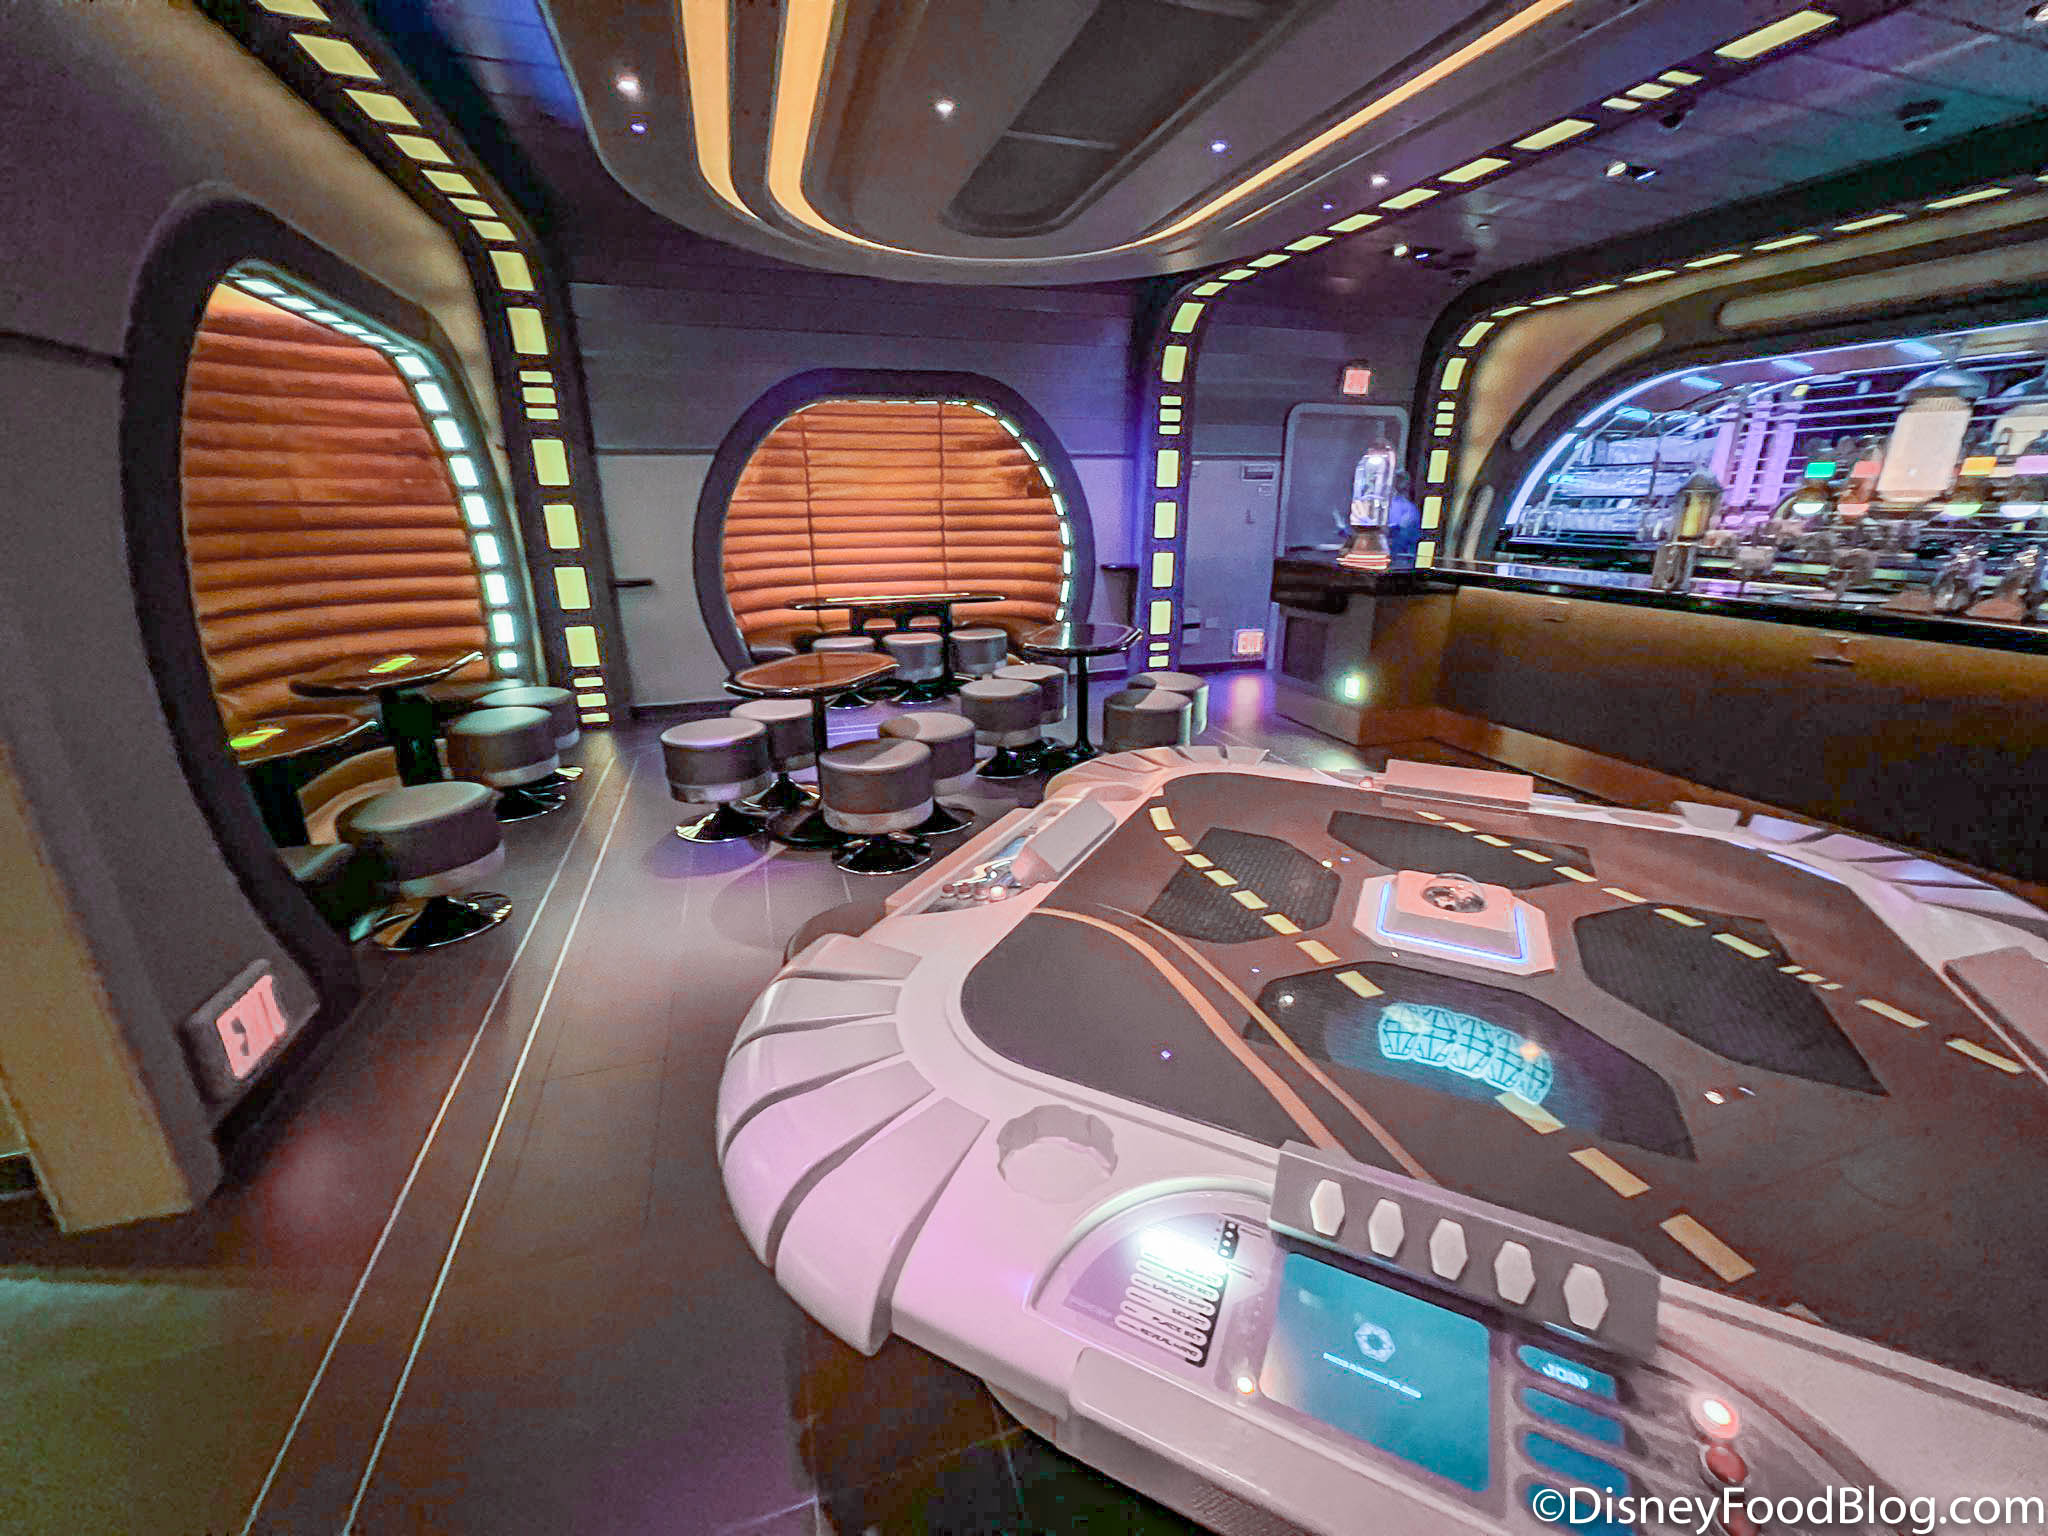 https://www.disneyfoodblog.com/wp-content/uploads/2022/02/2022-wdw-walt-disney-world-star-wars-galactic-starcruiser-hotel-media-preview-sublight-lounge-holo-sabacc-seating-tables-atmosphere-12.jpg